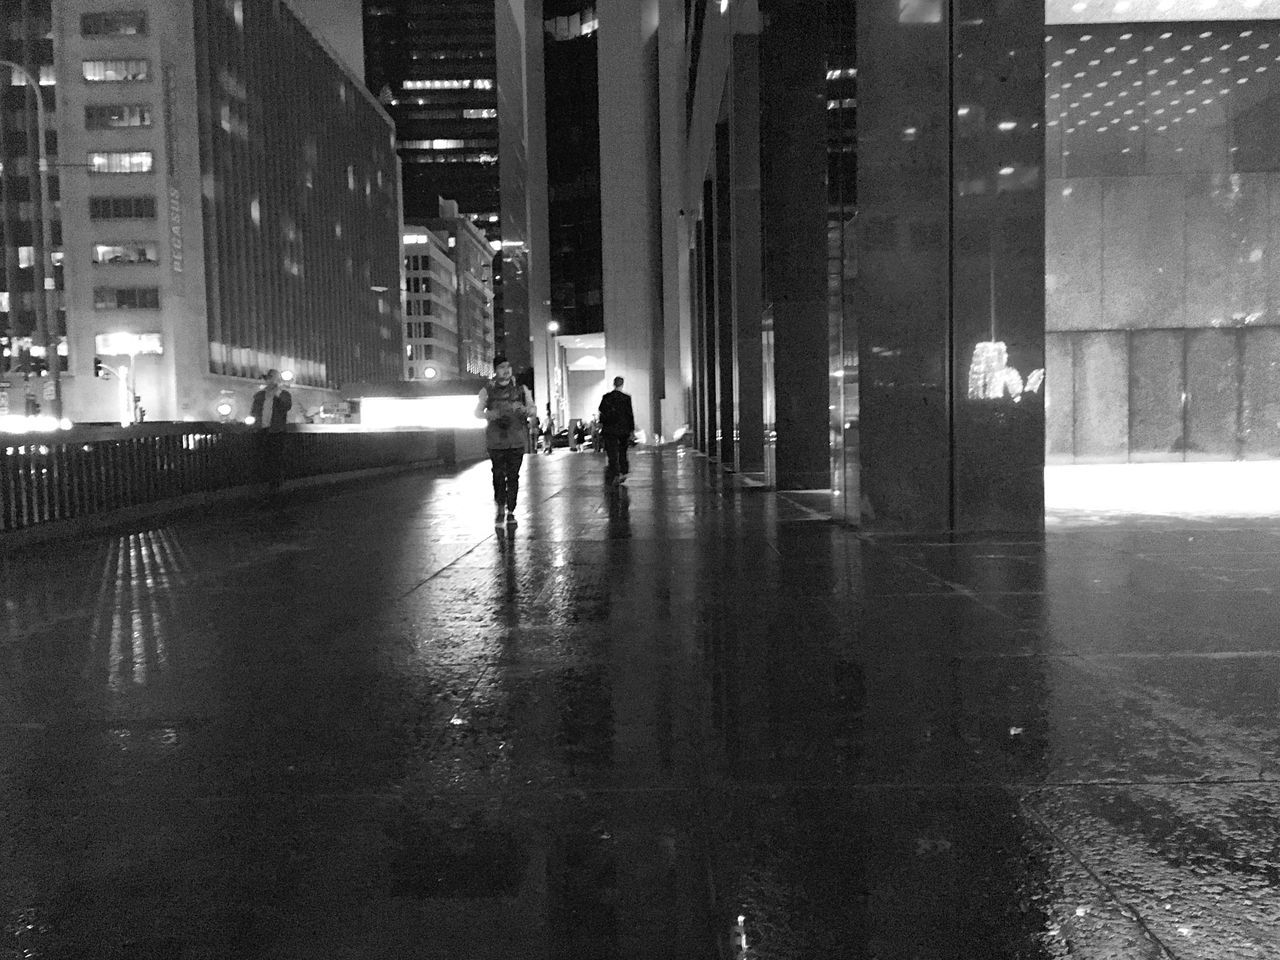 building exterior, architecture, city, built structure, street, walking, city life, rain, wet, men, full length, reflection, building, lifestyles, rear view, water, season, road